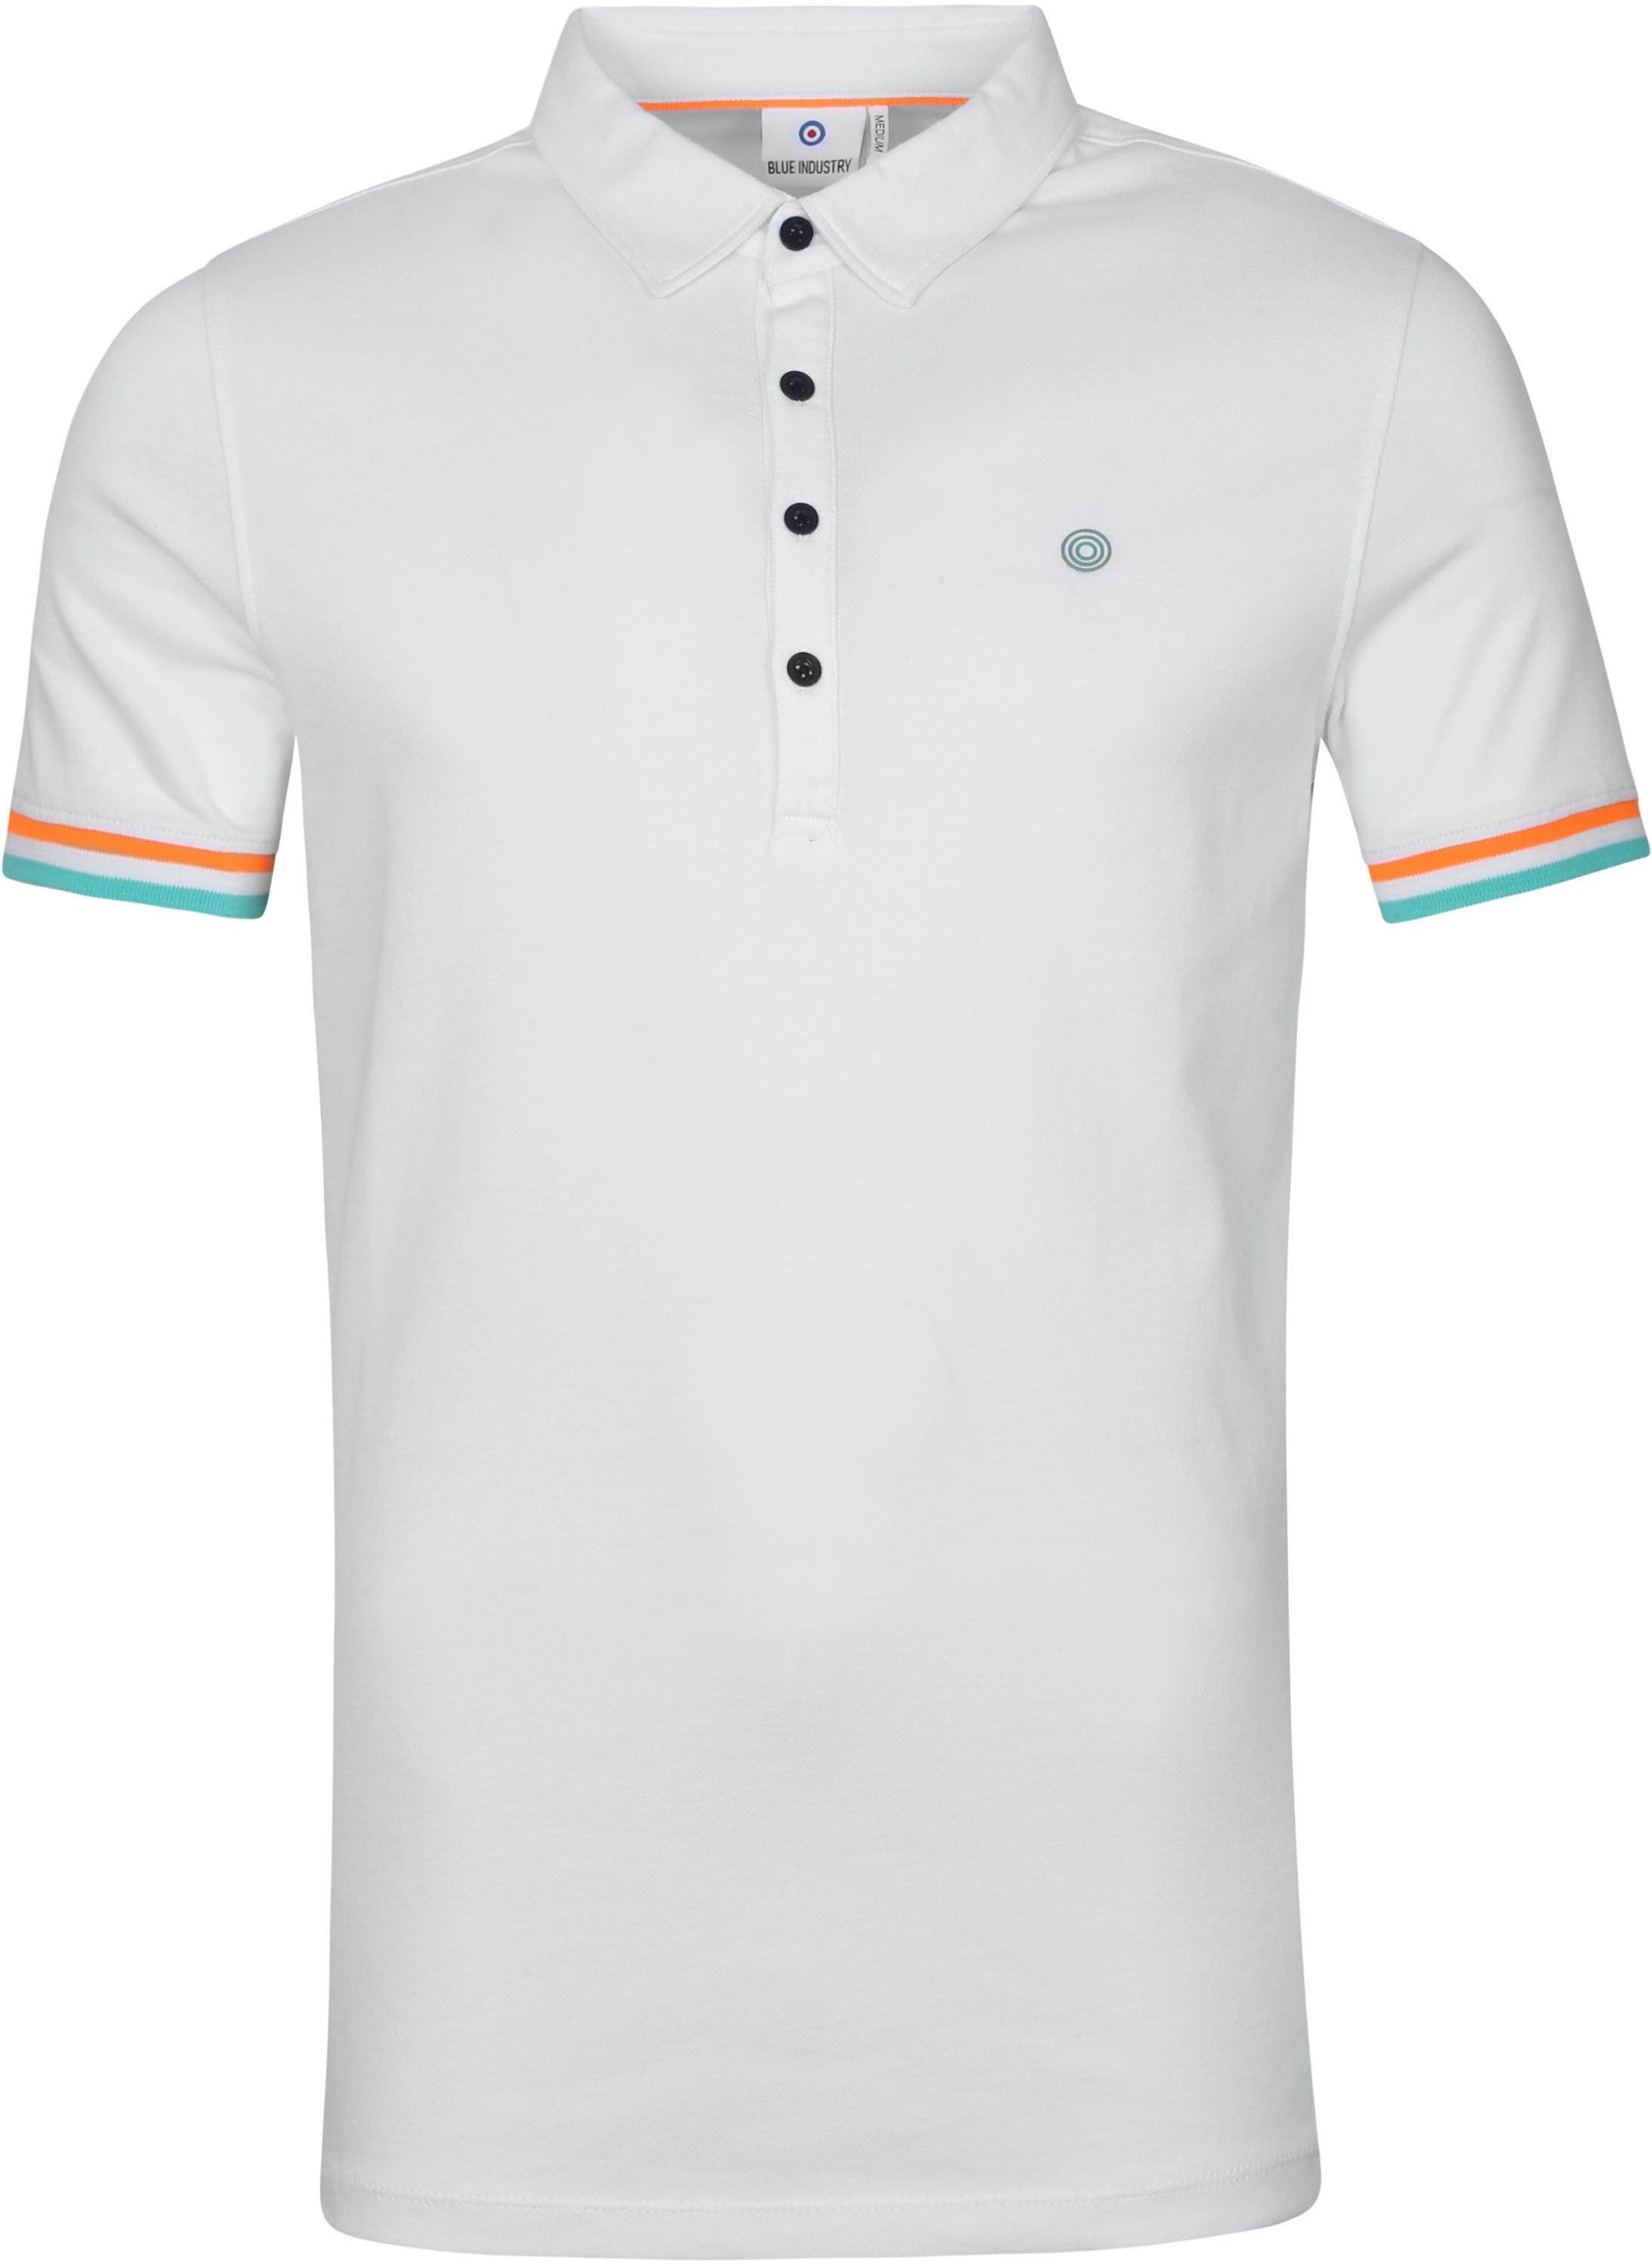 Blue Industry Polo Shirt KBIS20 M80 White size M